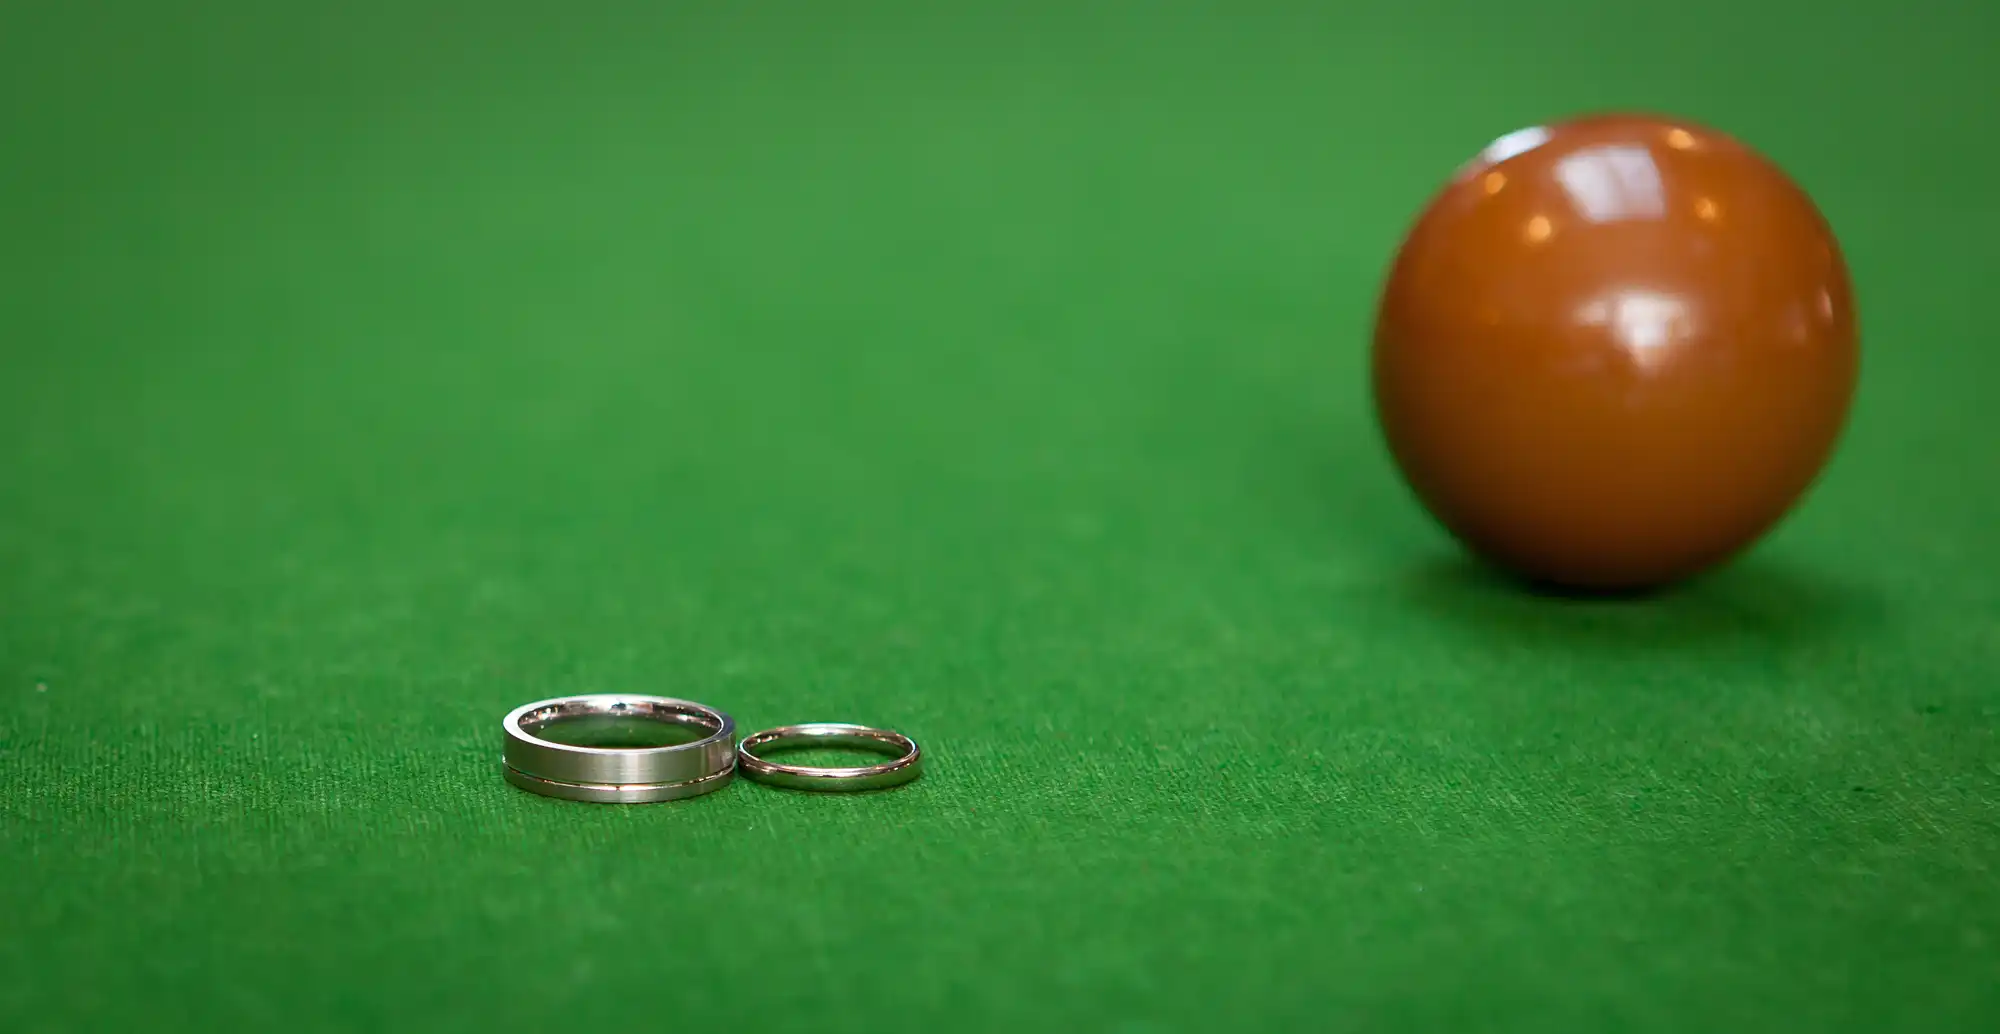 Two wedding rings placed on a green surface near a shiny orange billiard ball.